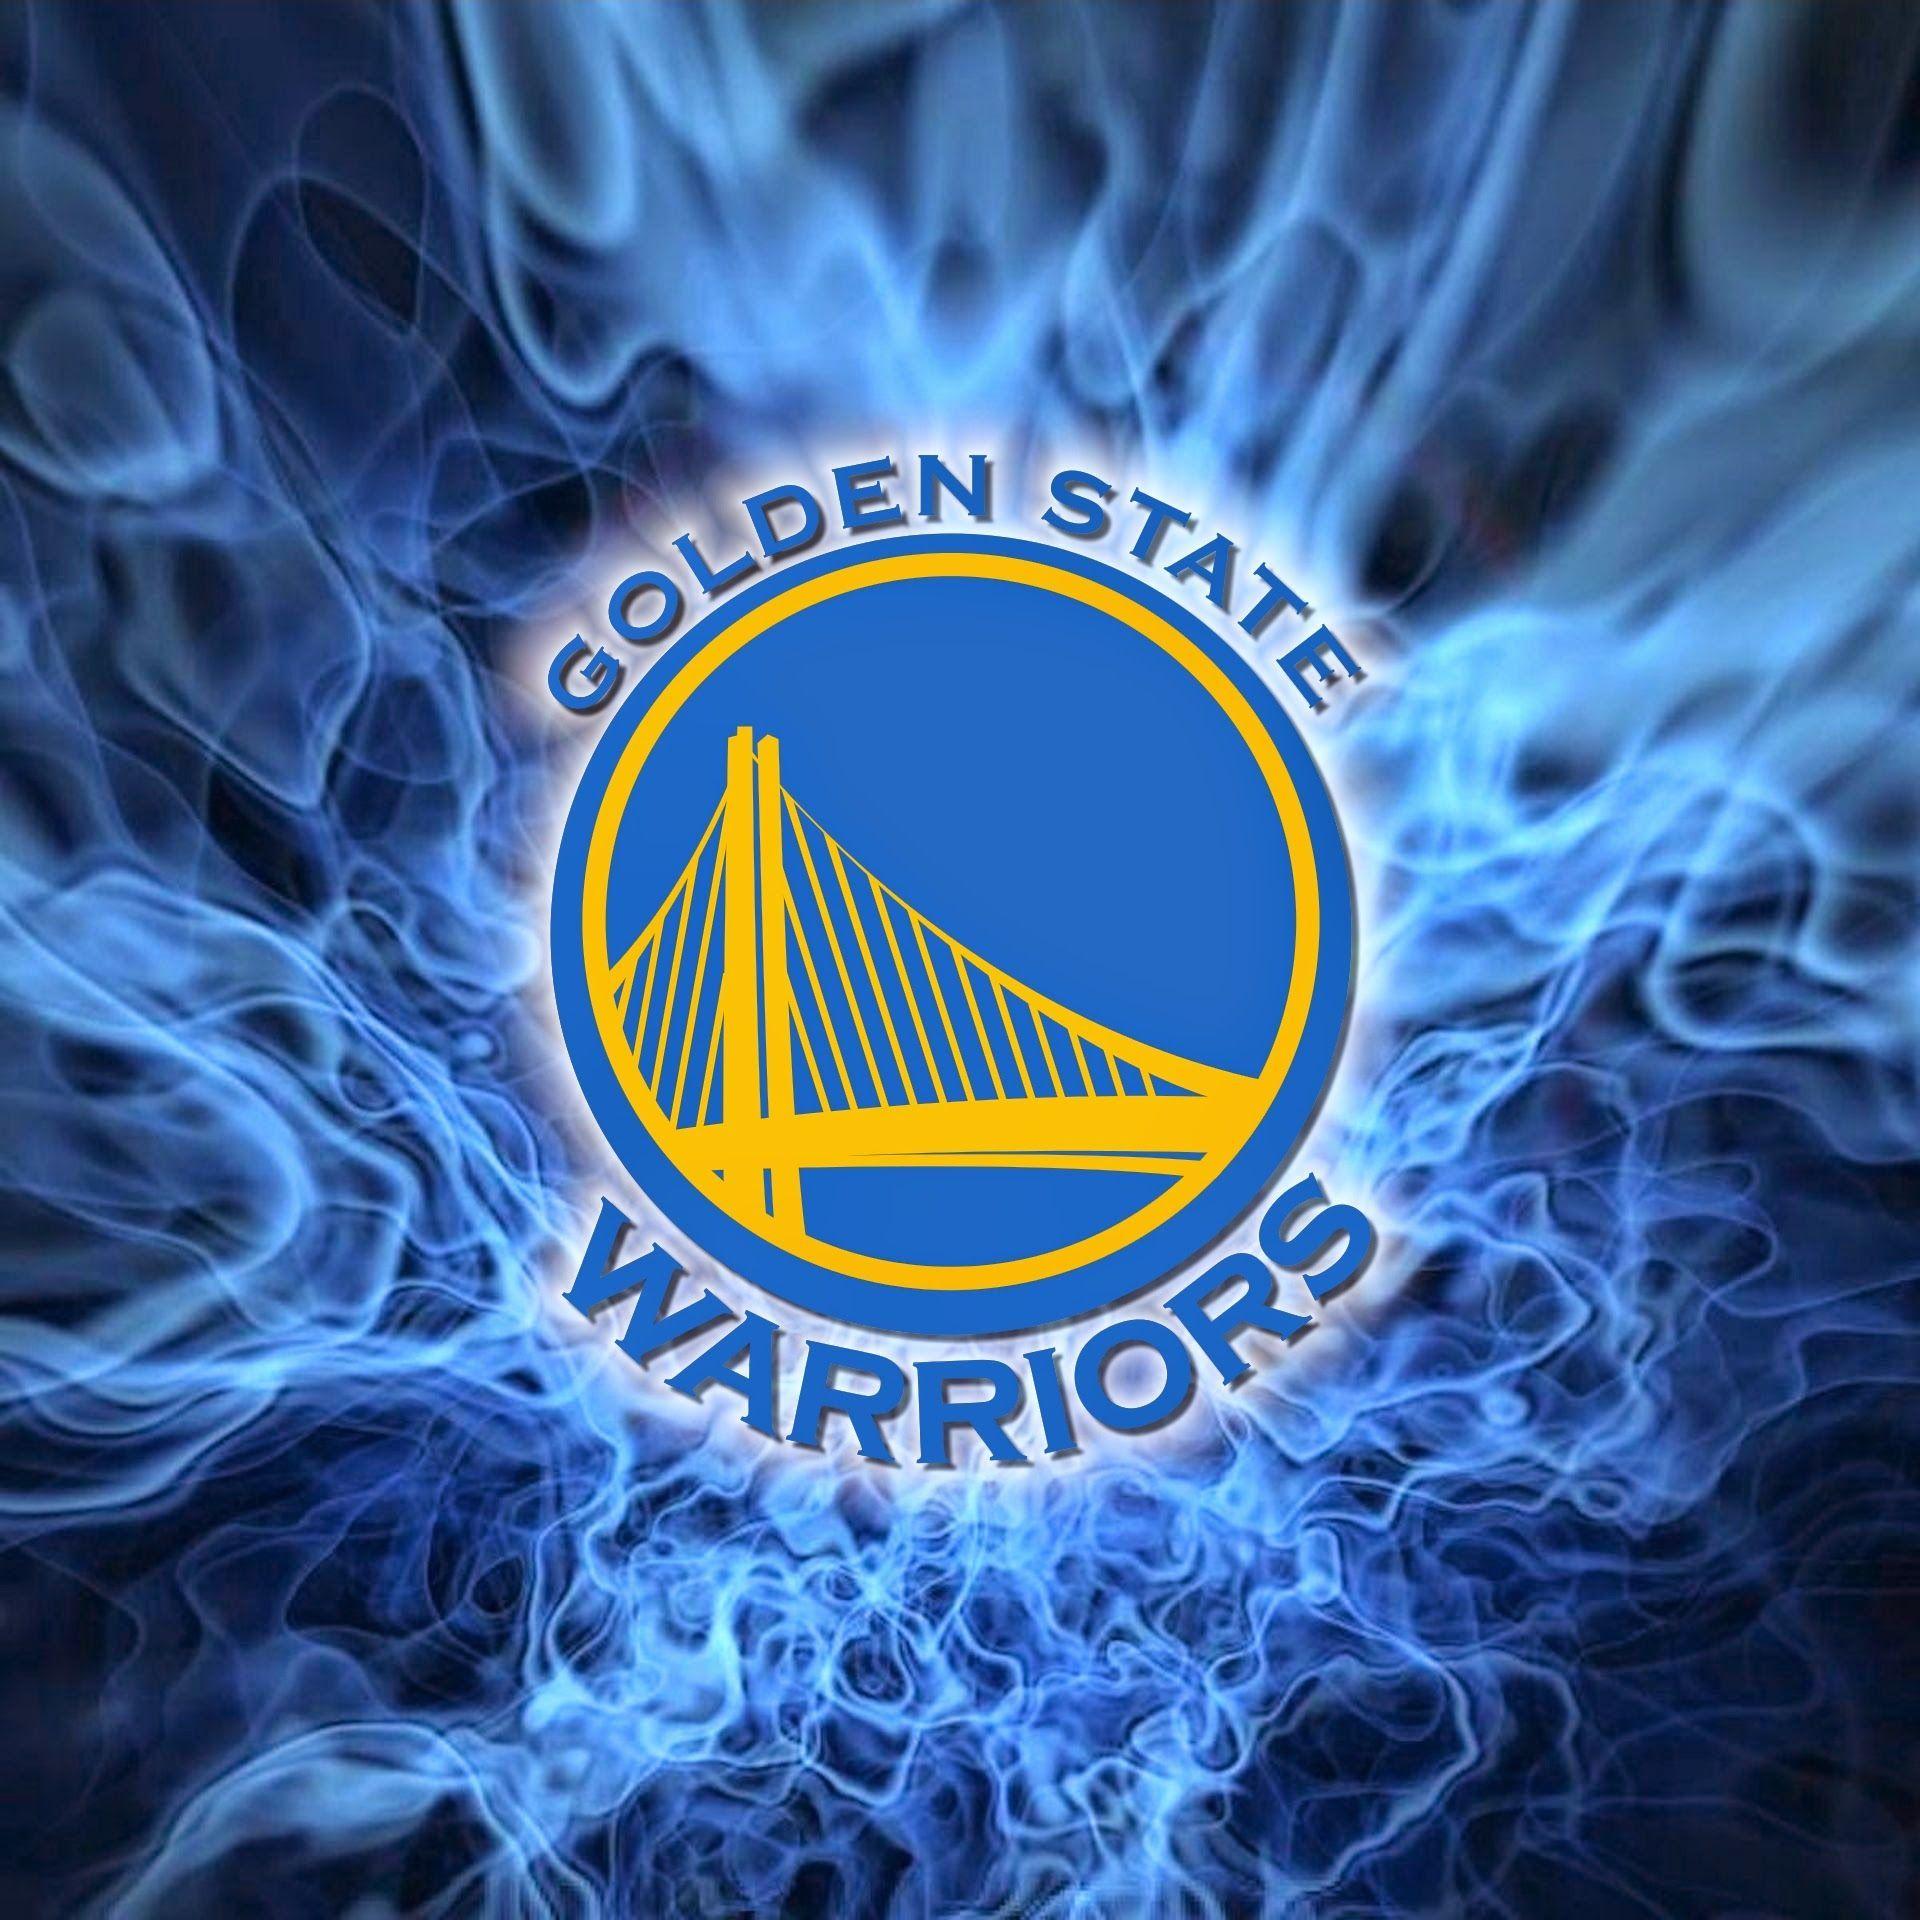 Golden State Warriors Wallpaper Group with items. wallpaper